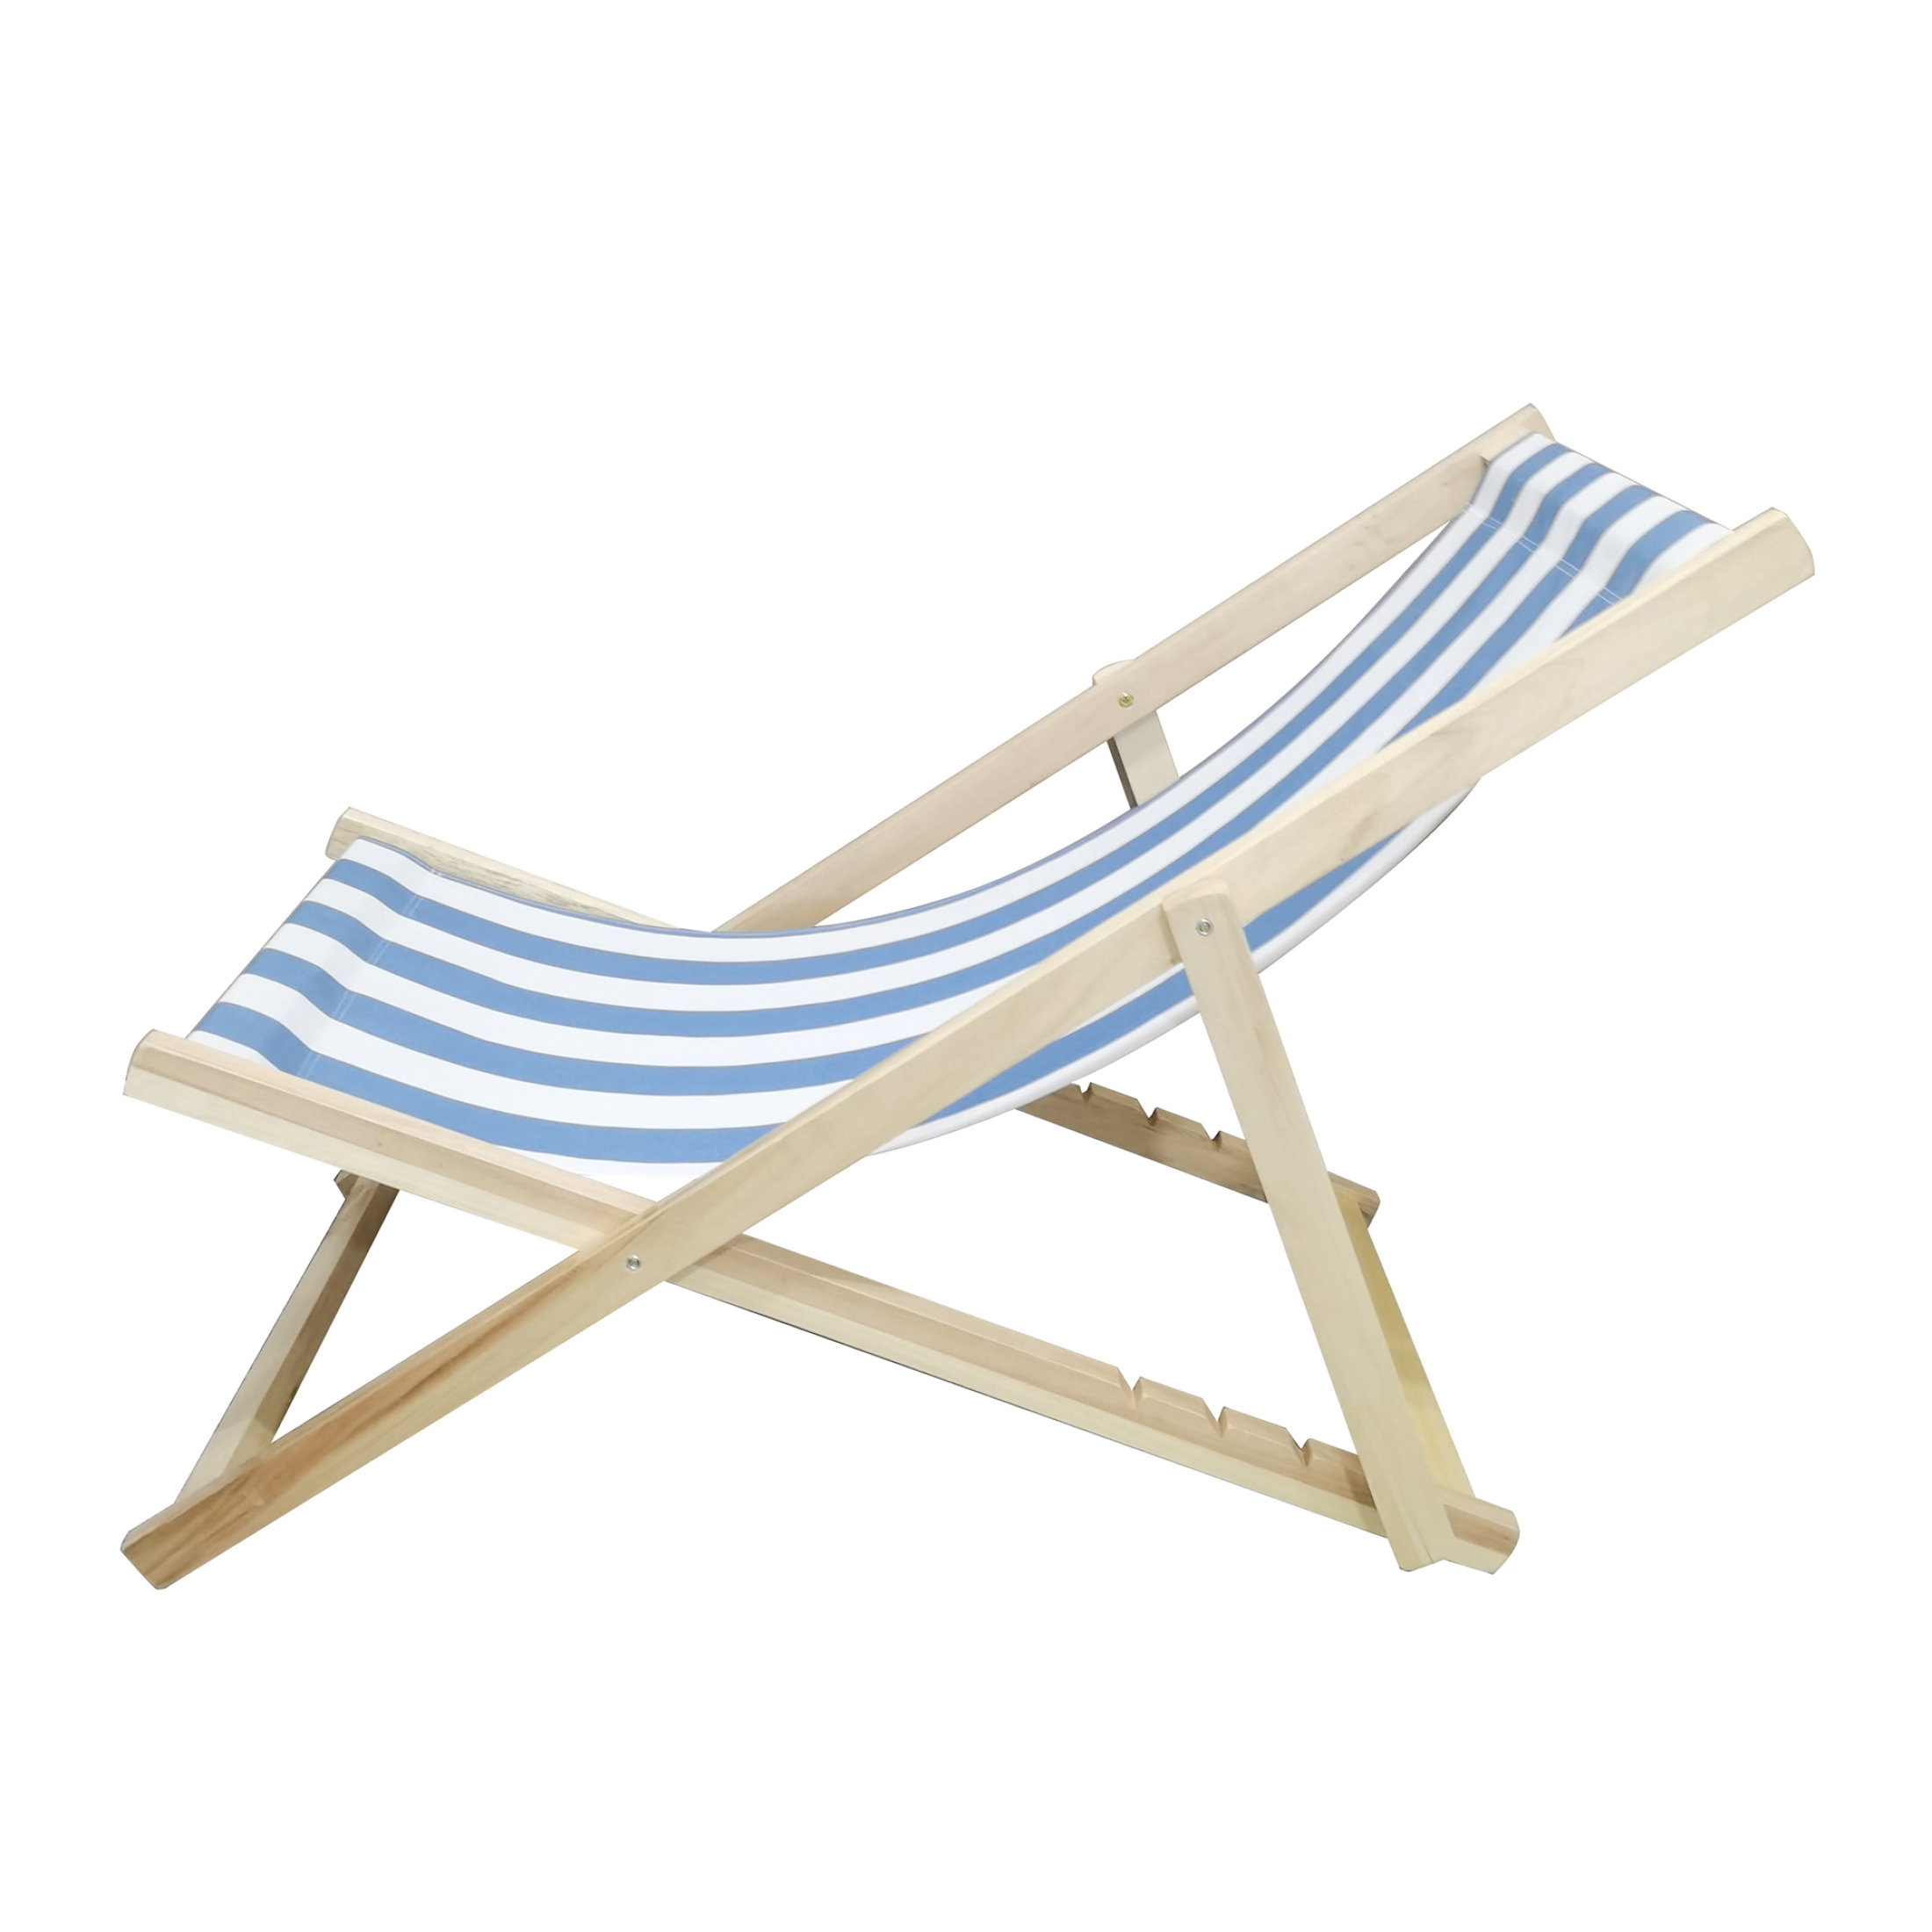 Pouseayar Foldable Sling Chair,Outdoor Beach Chair Chaise Lounge, Blue - image 2 of 8